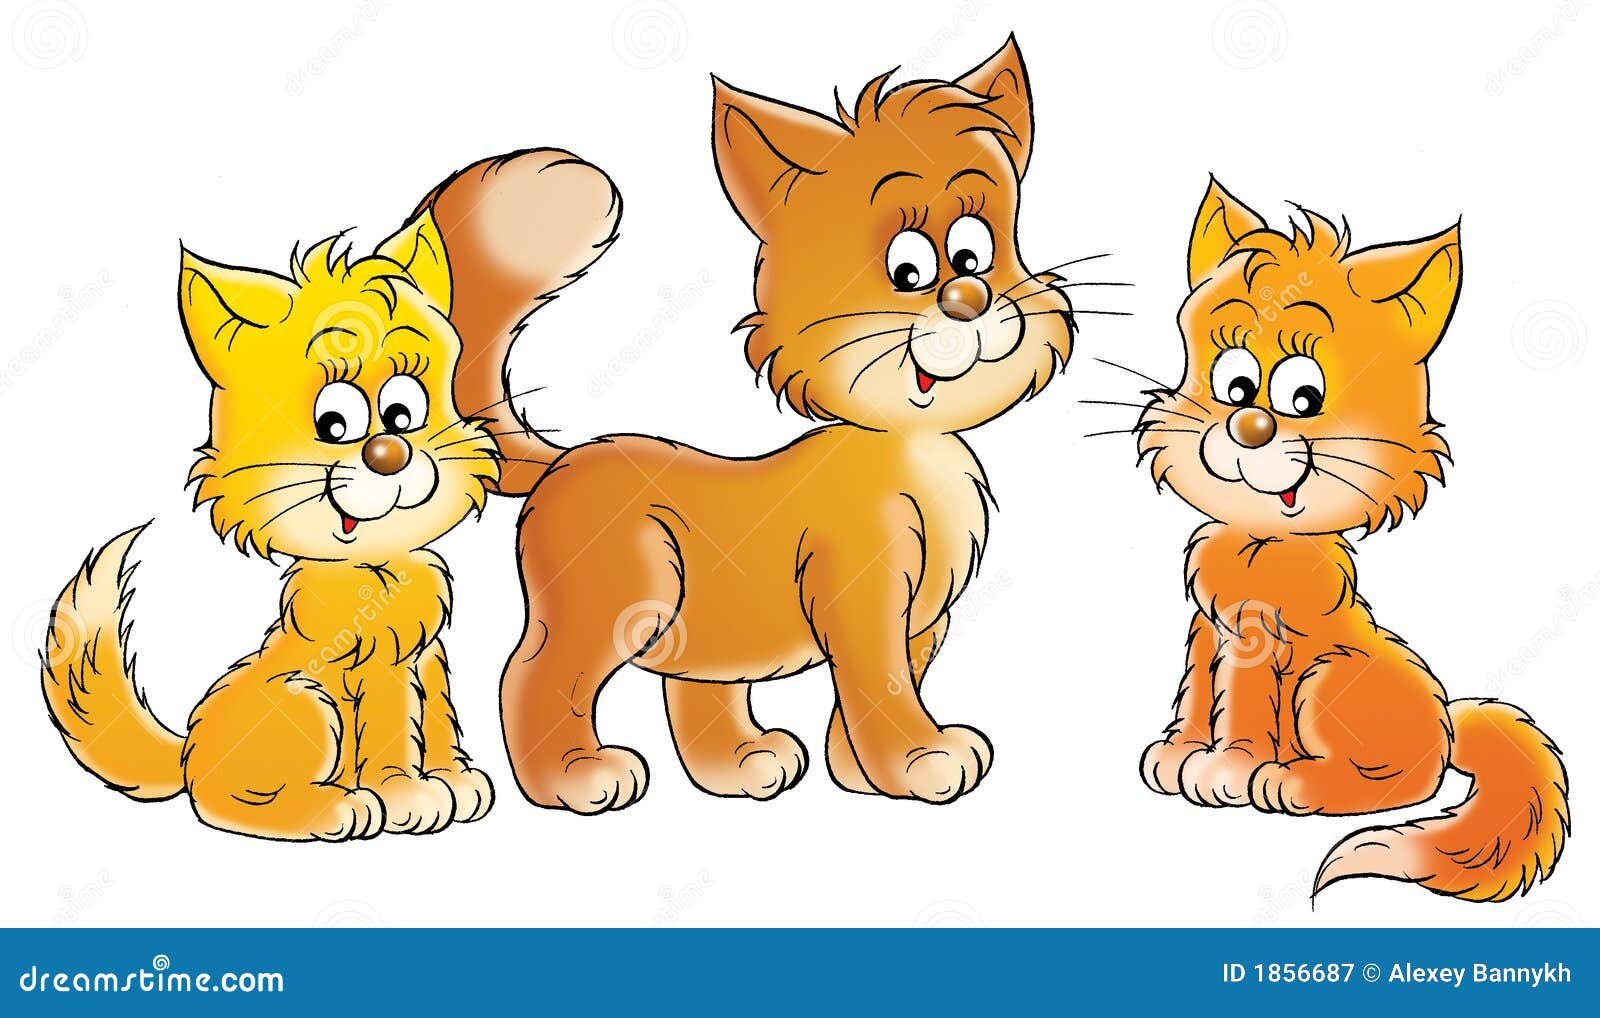 free clipart cats and kittens - photo #10